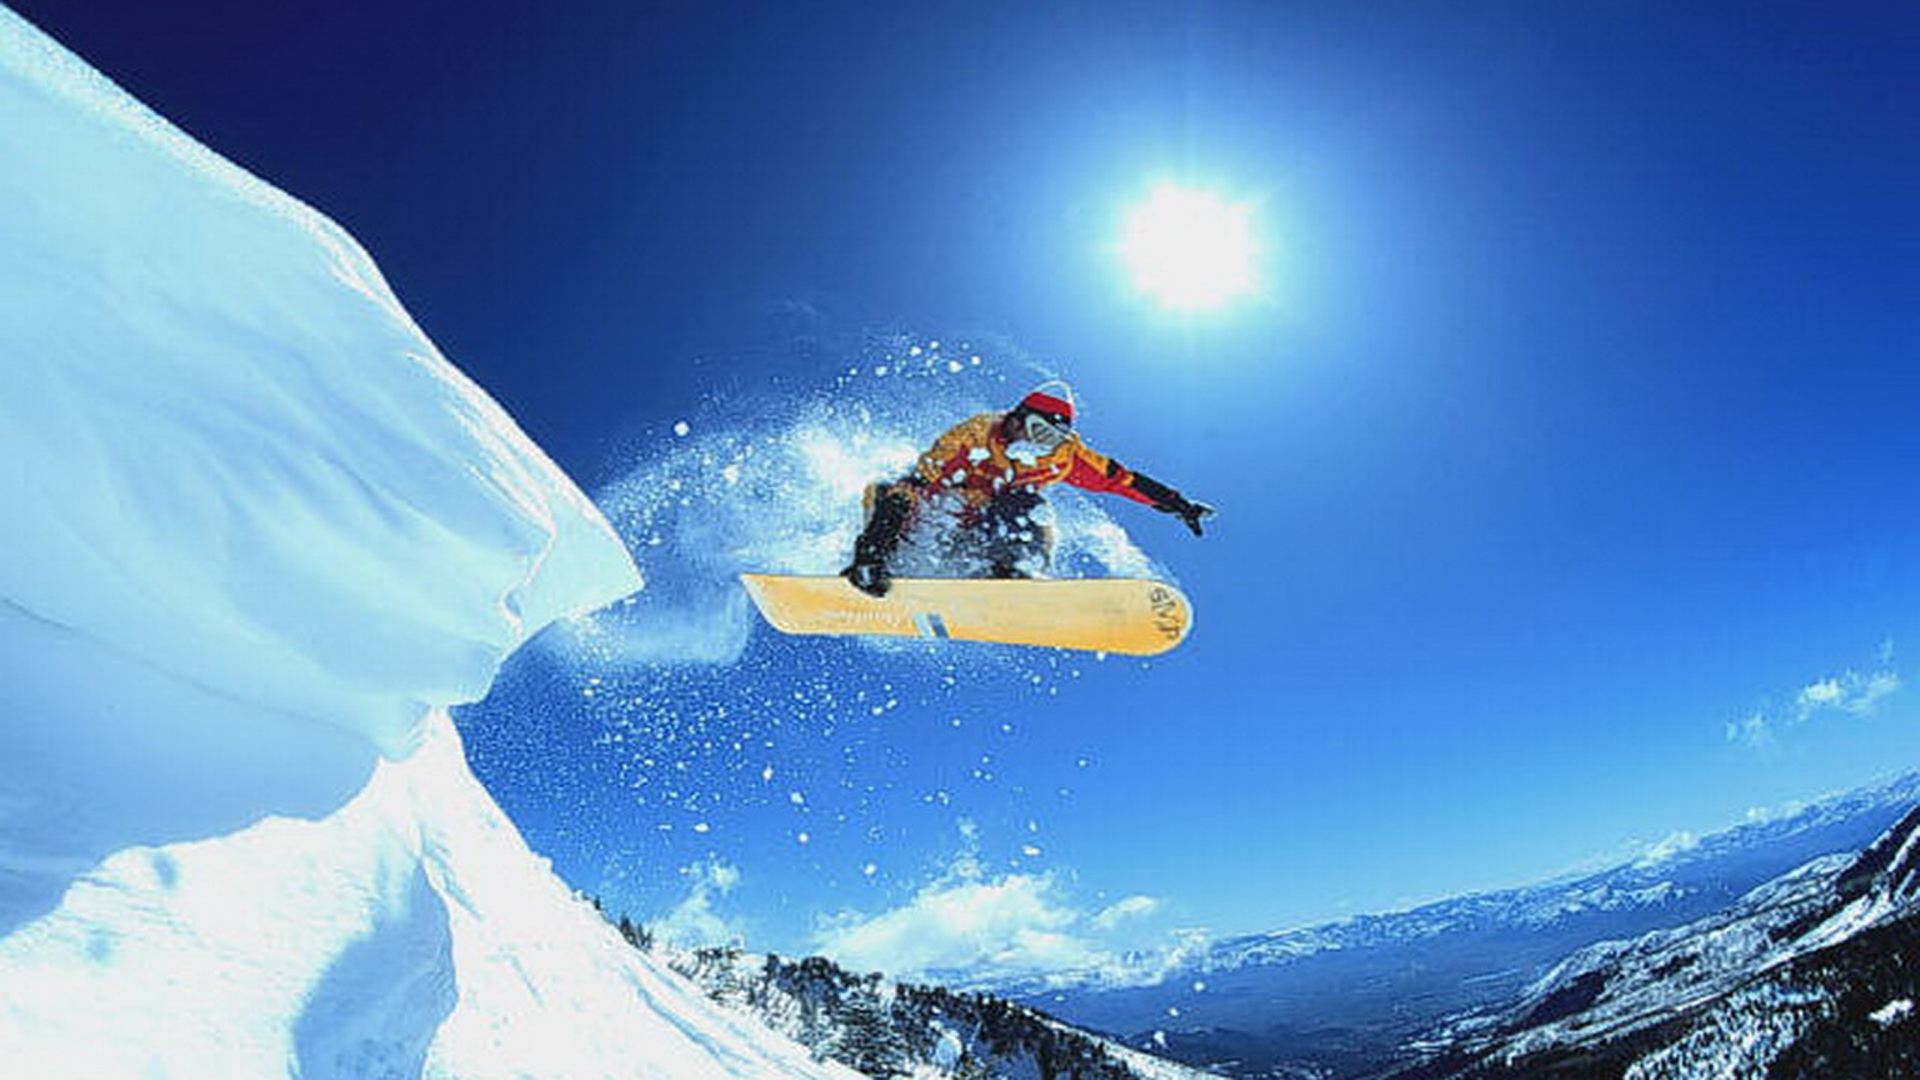 Snowboard Wallpaper Collection (44+)